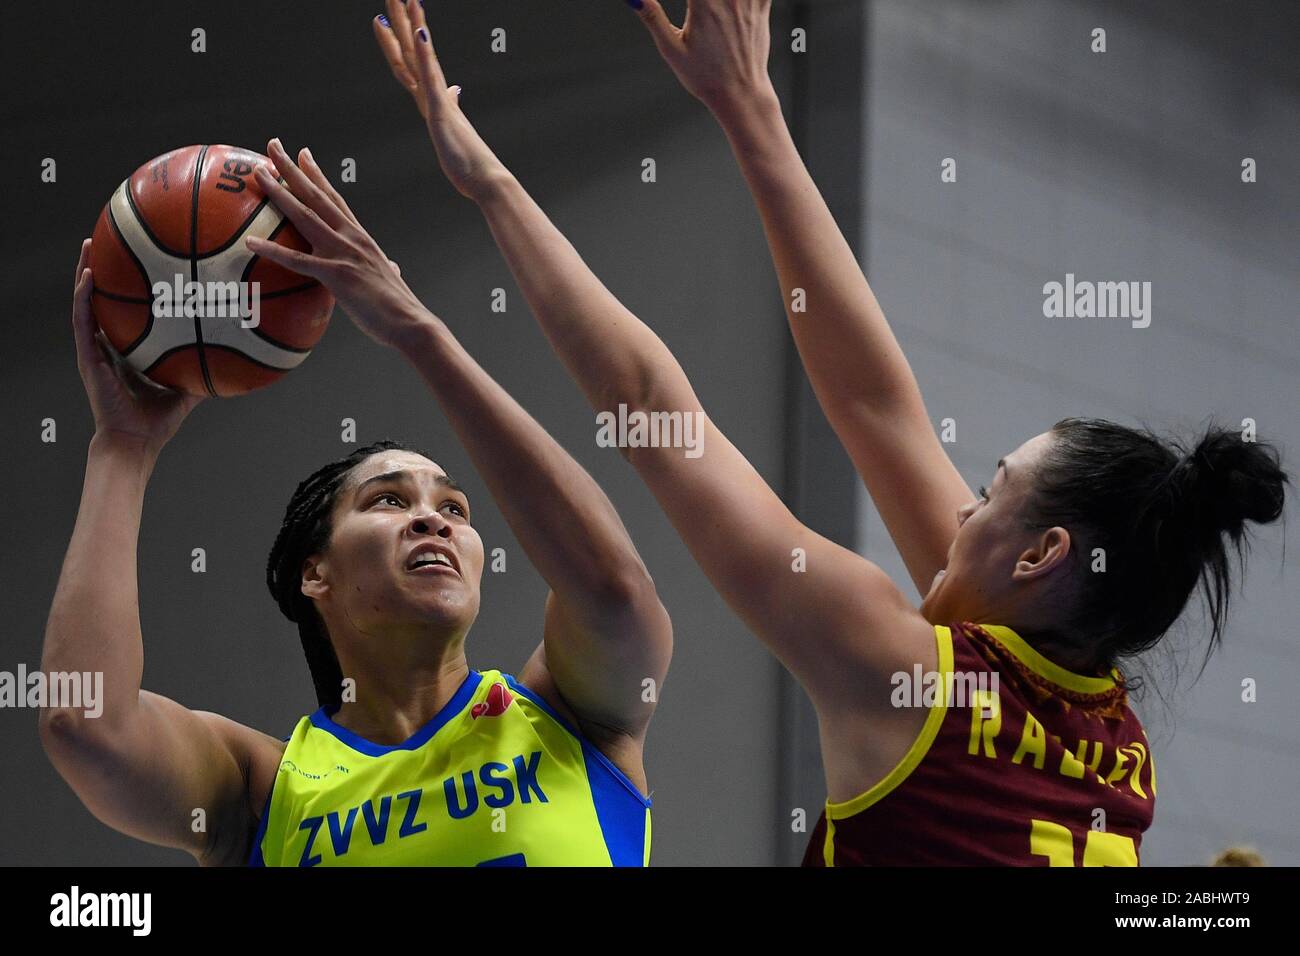 Prague, Czech Republic. 27th Nov, 2019. Brionna Jones of USK, left, and  Albina Razheva of Orenburg in action during the match of the 5th round of  group A of women's basketball European